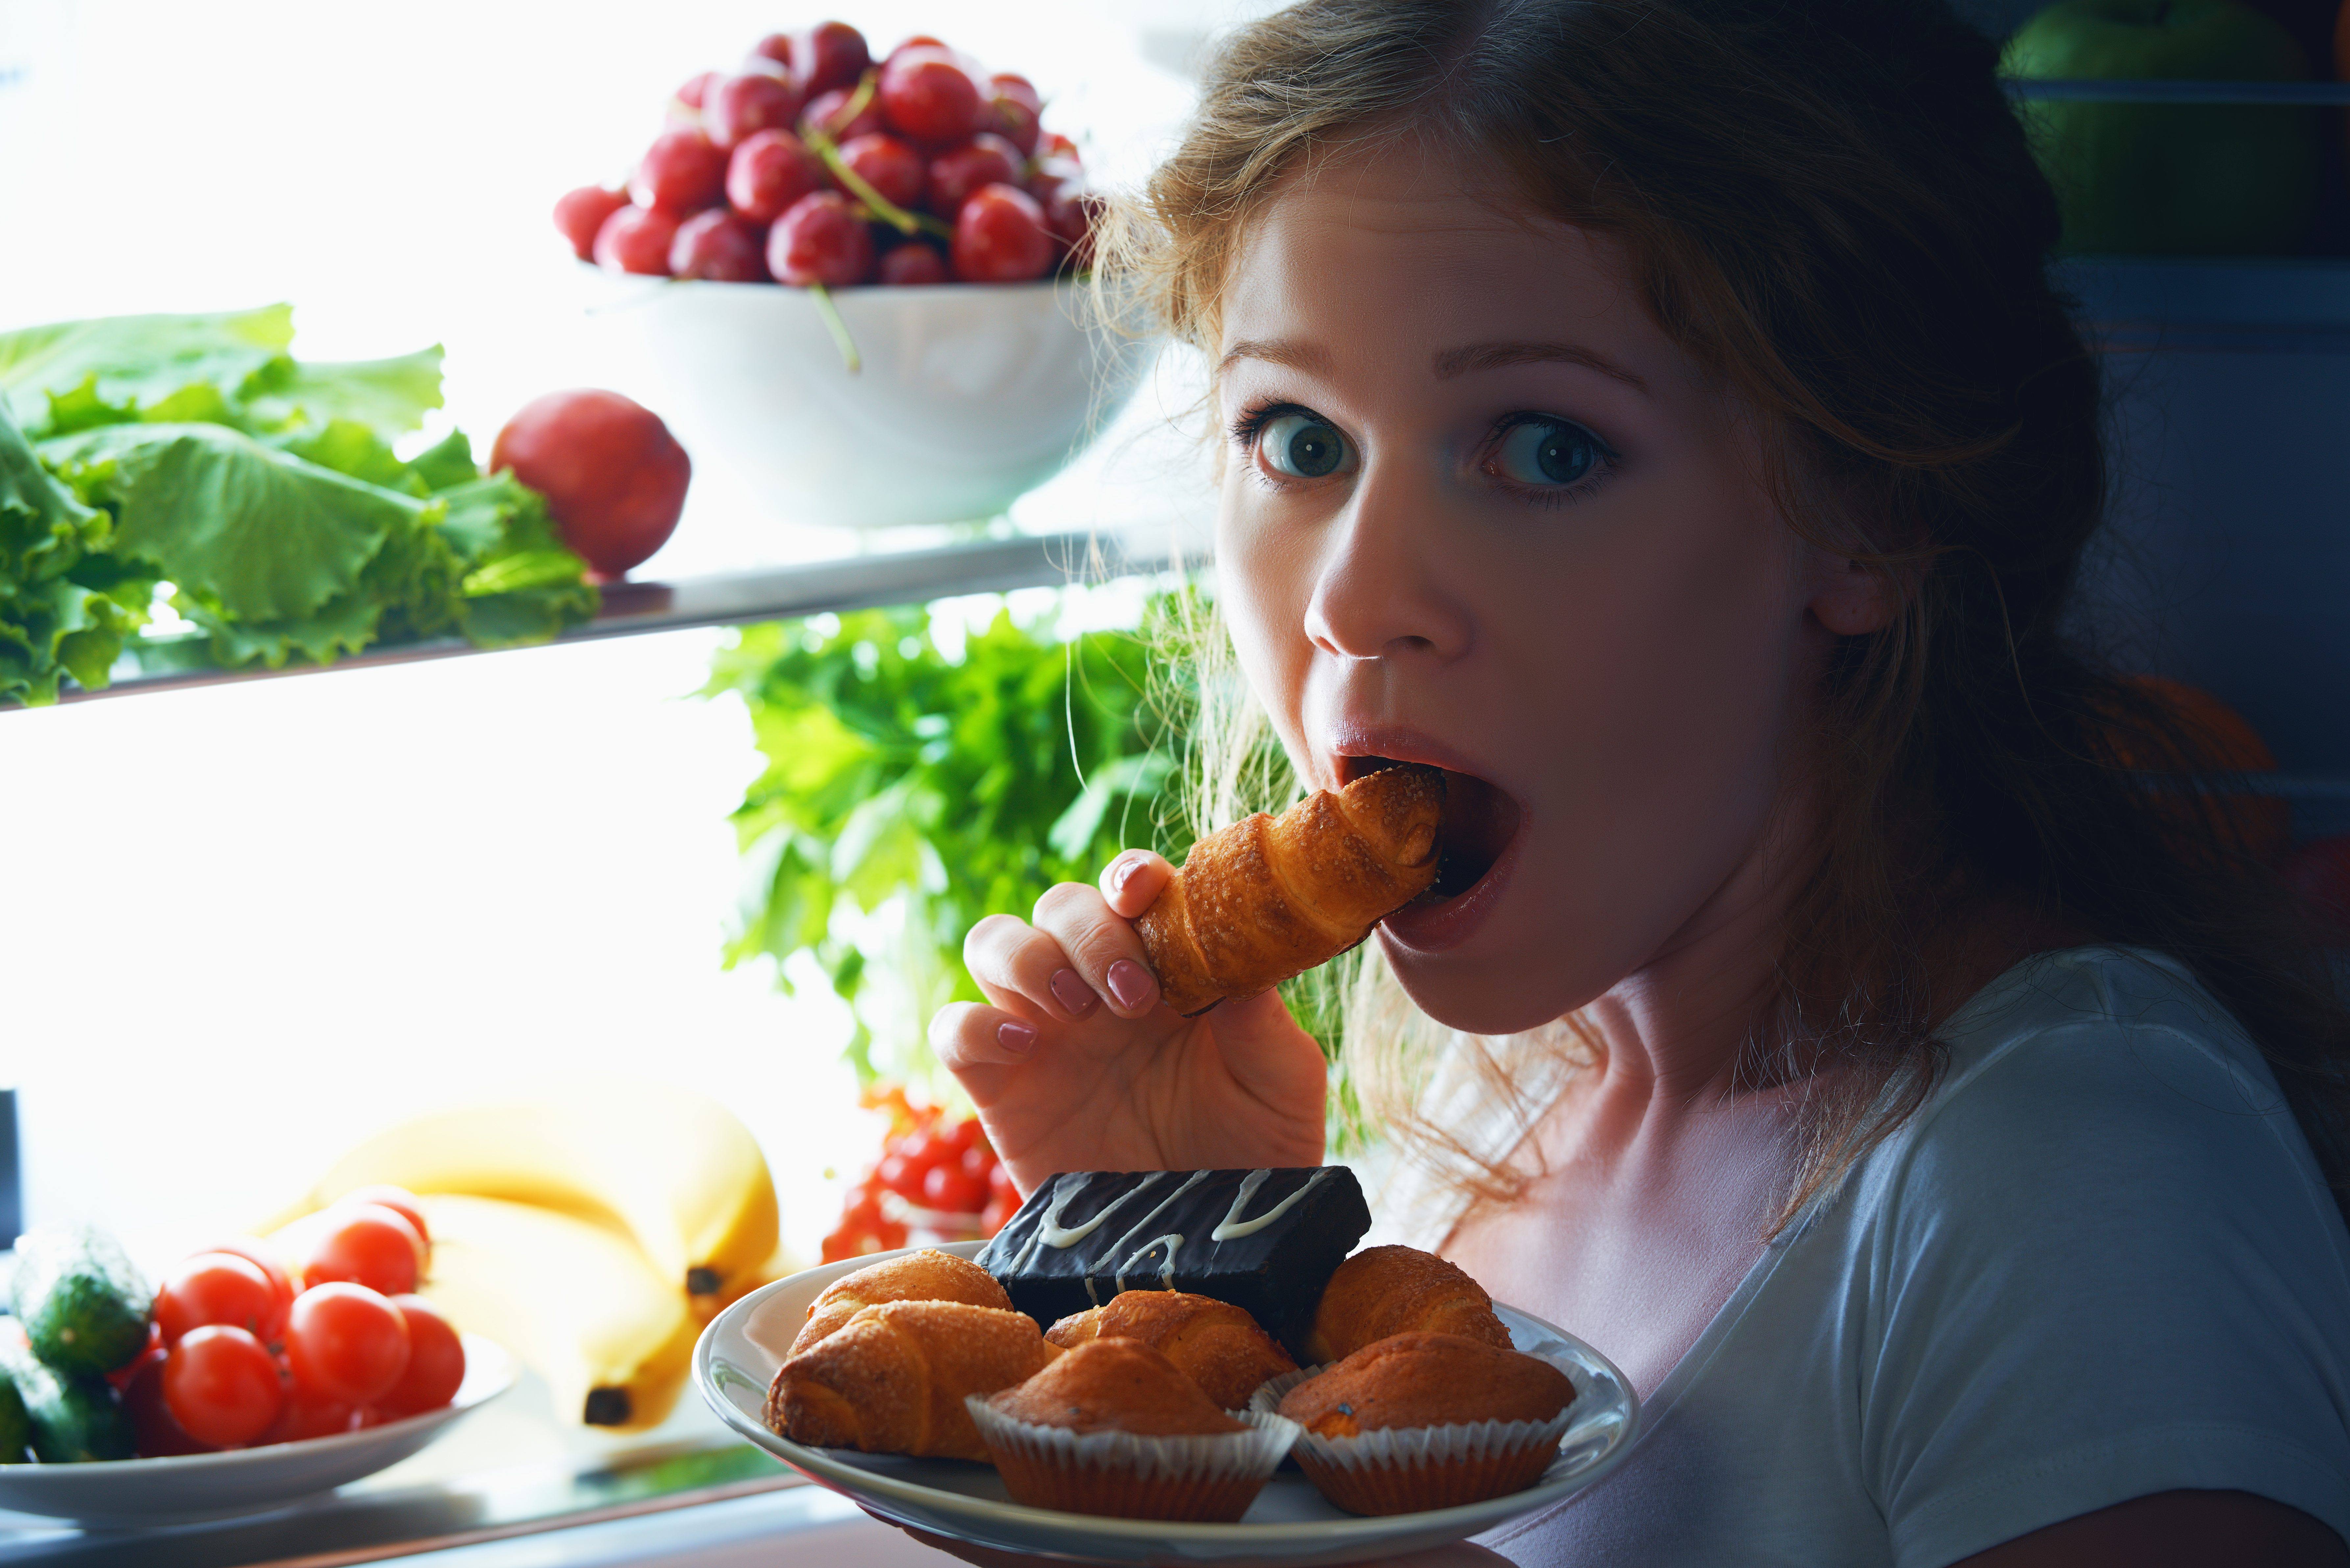 how to stop late night food cravings